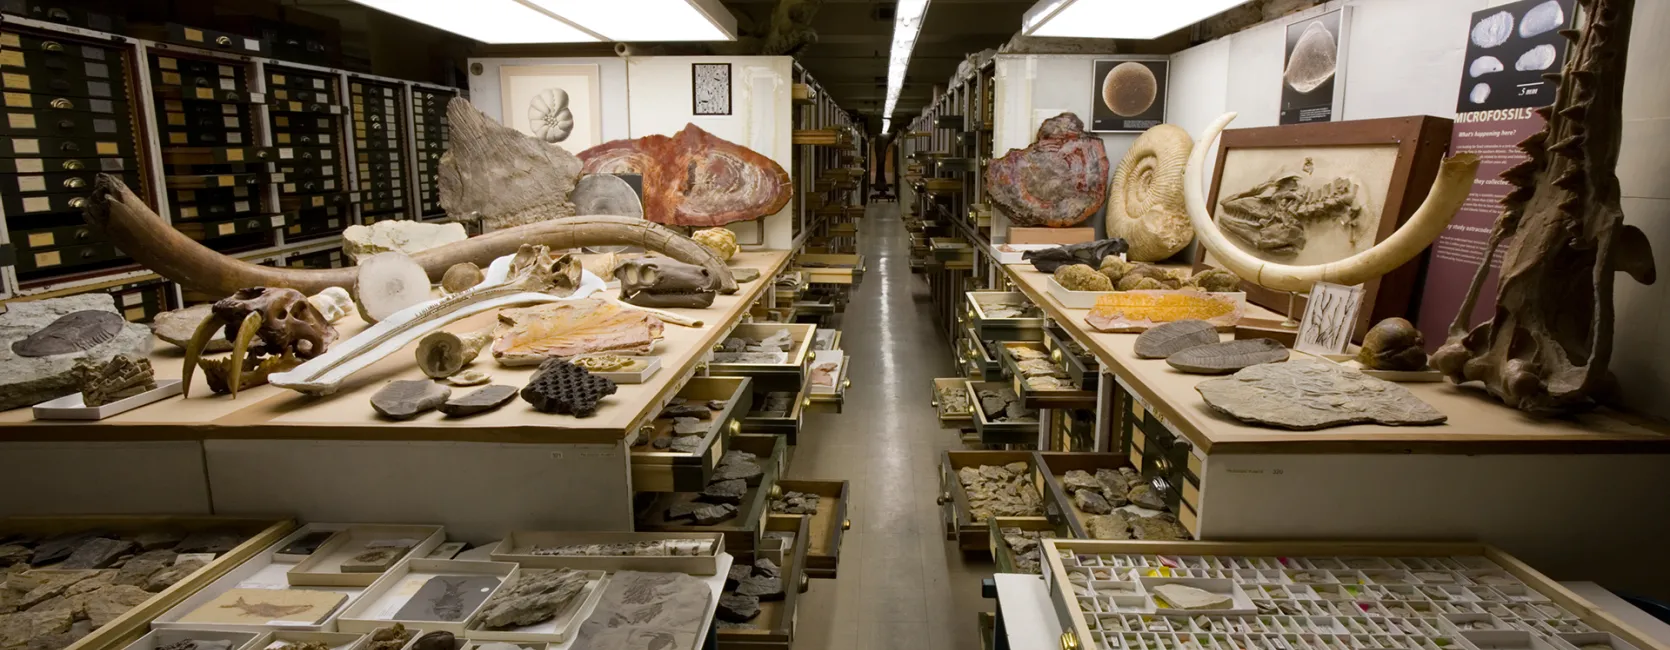 Image depicts an aisle in the paleobiology collections space with many fossils displayed to show the variety and vastness of the collection.